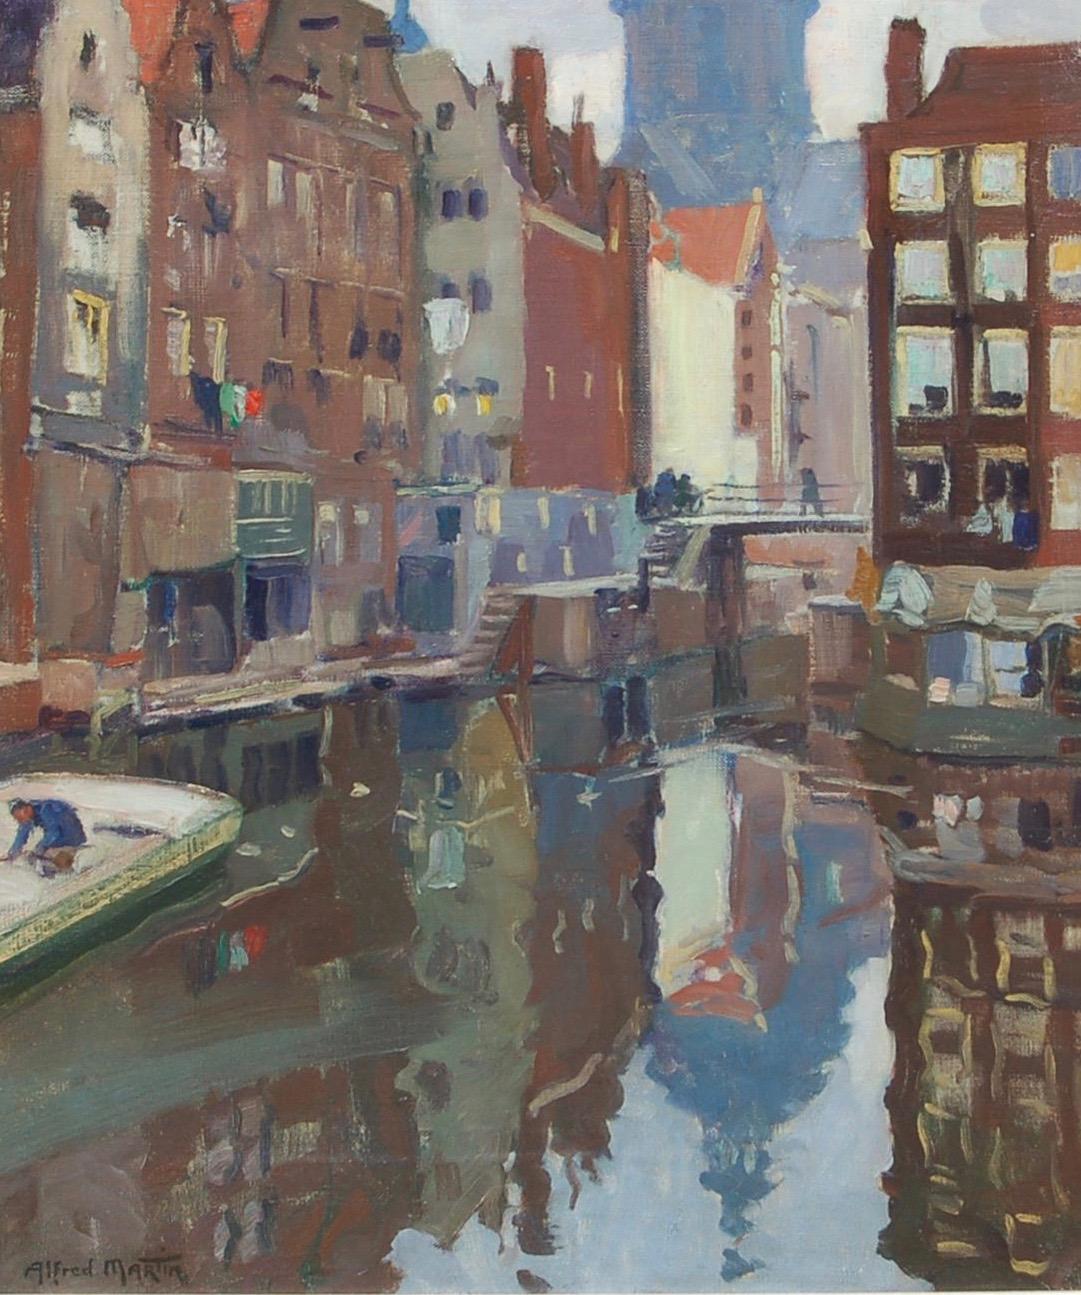 Early 20th century Impressionist view of Amsterdam, canals, a church and barges - Painting by Alfred Martin